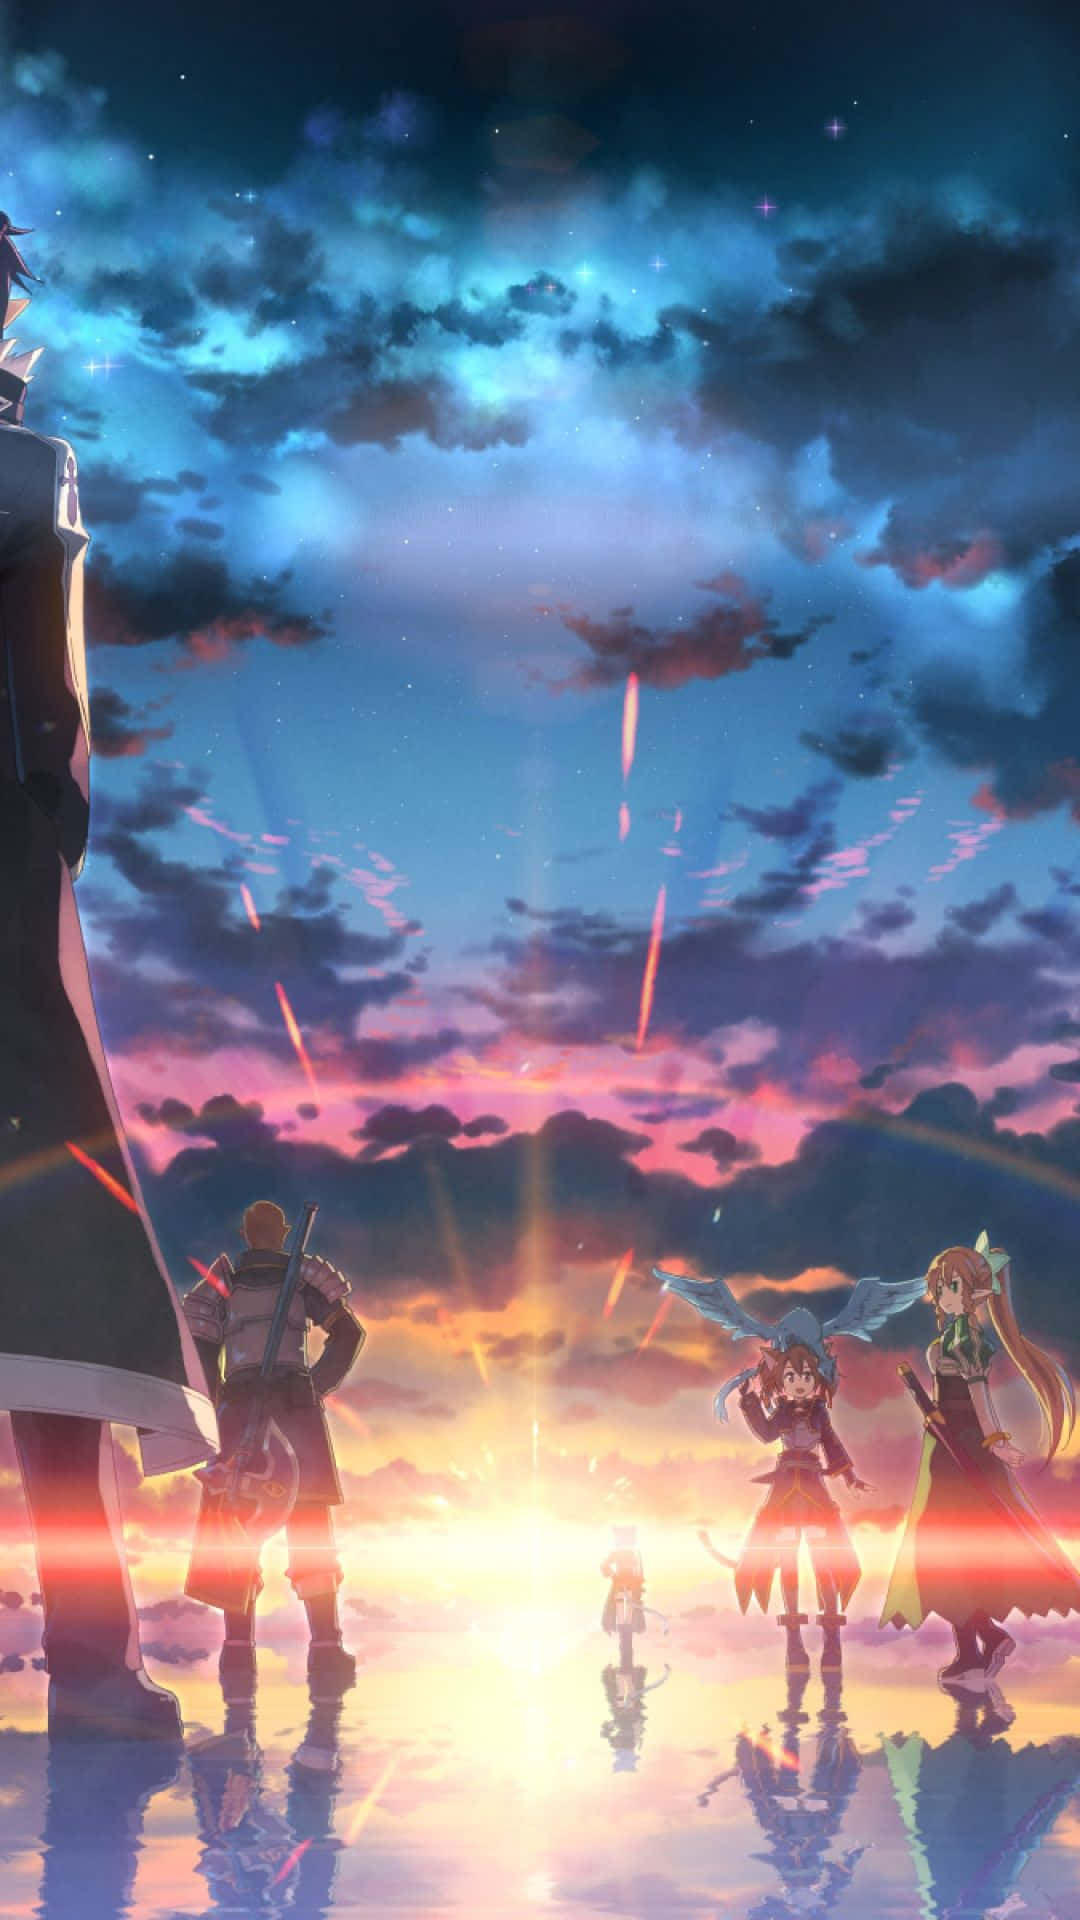 Download now and experience Sword Art Online with your Iphone Wallpaper